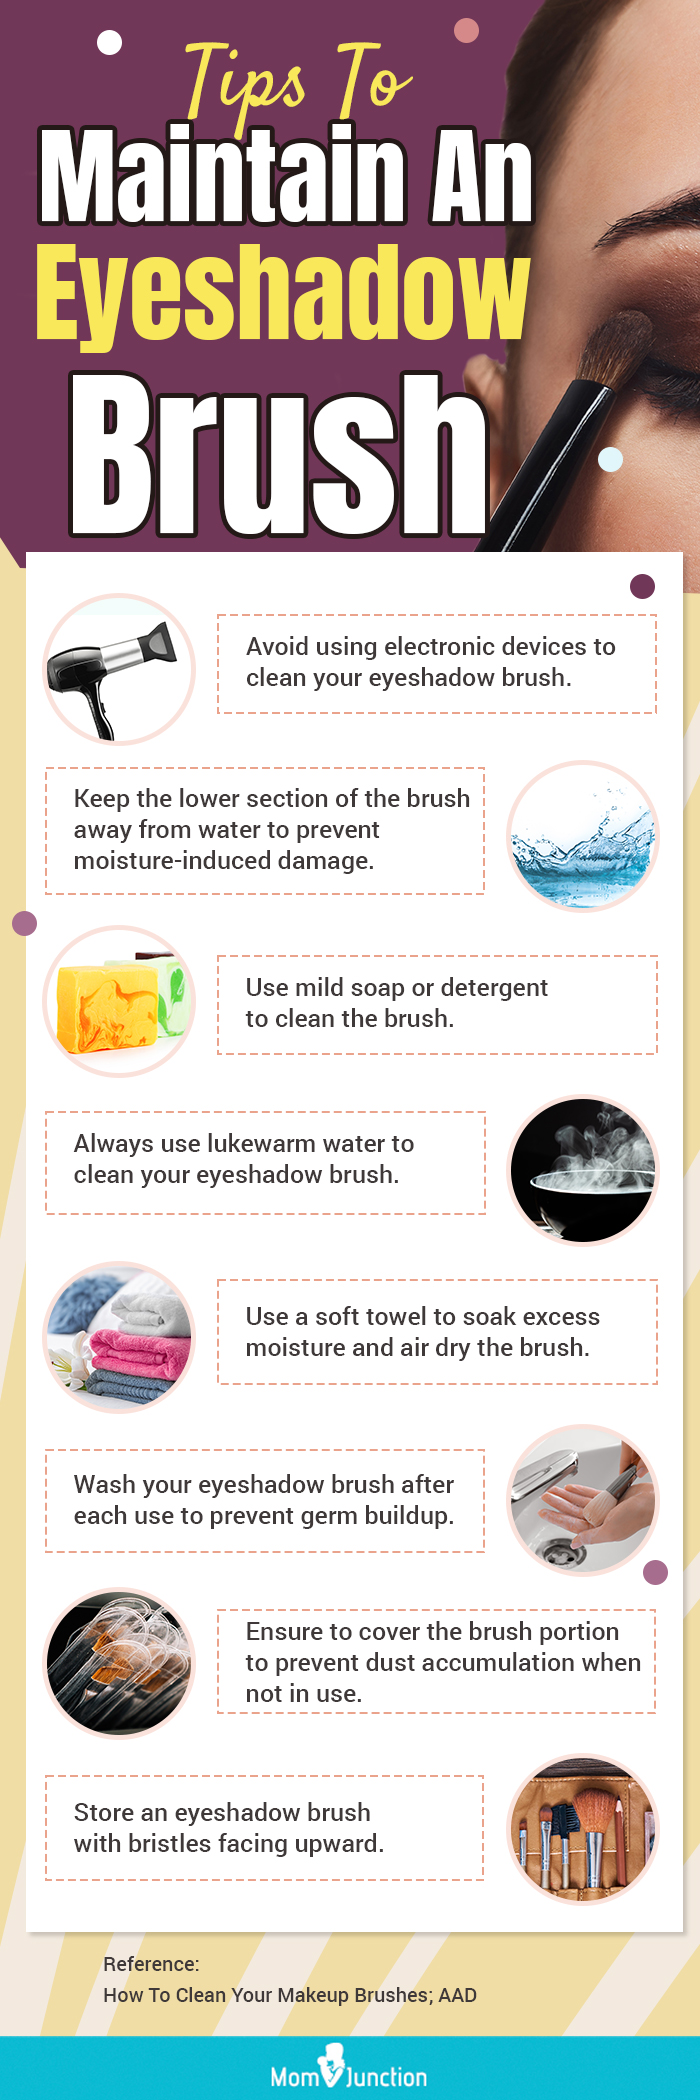 Tips To Maintain An Eyeshadow Brush (infographic) 